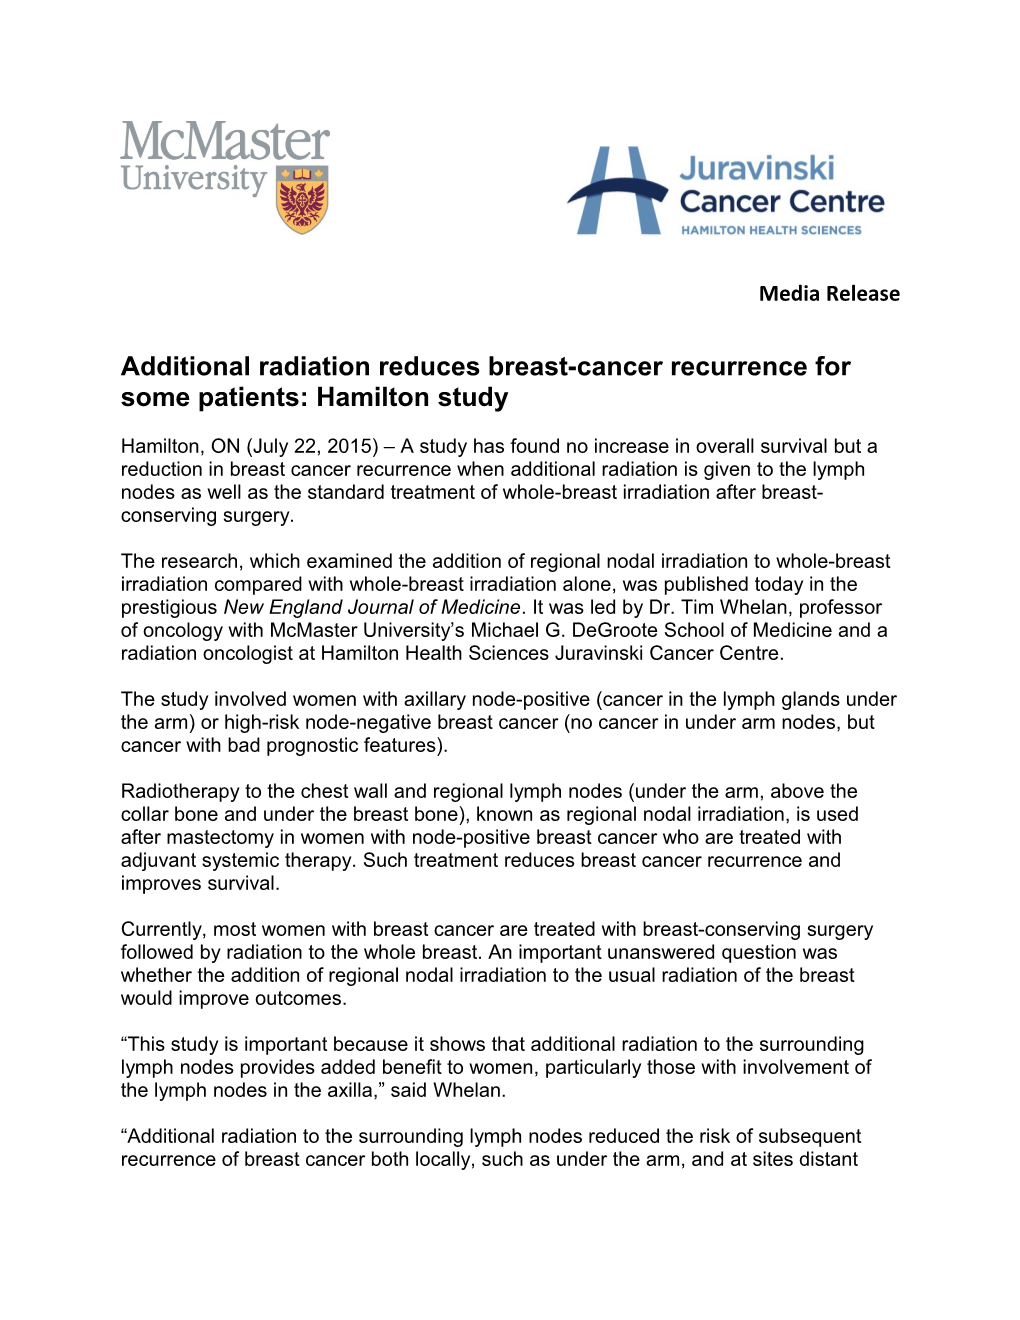 Additional Radiation Reduces Breast-Cancer Recurrence for Some Patients: Hamiltonstudy